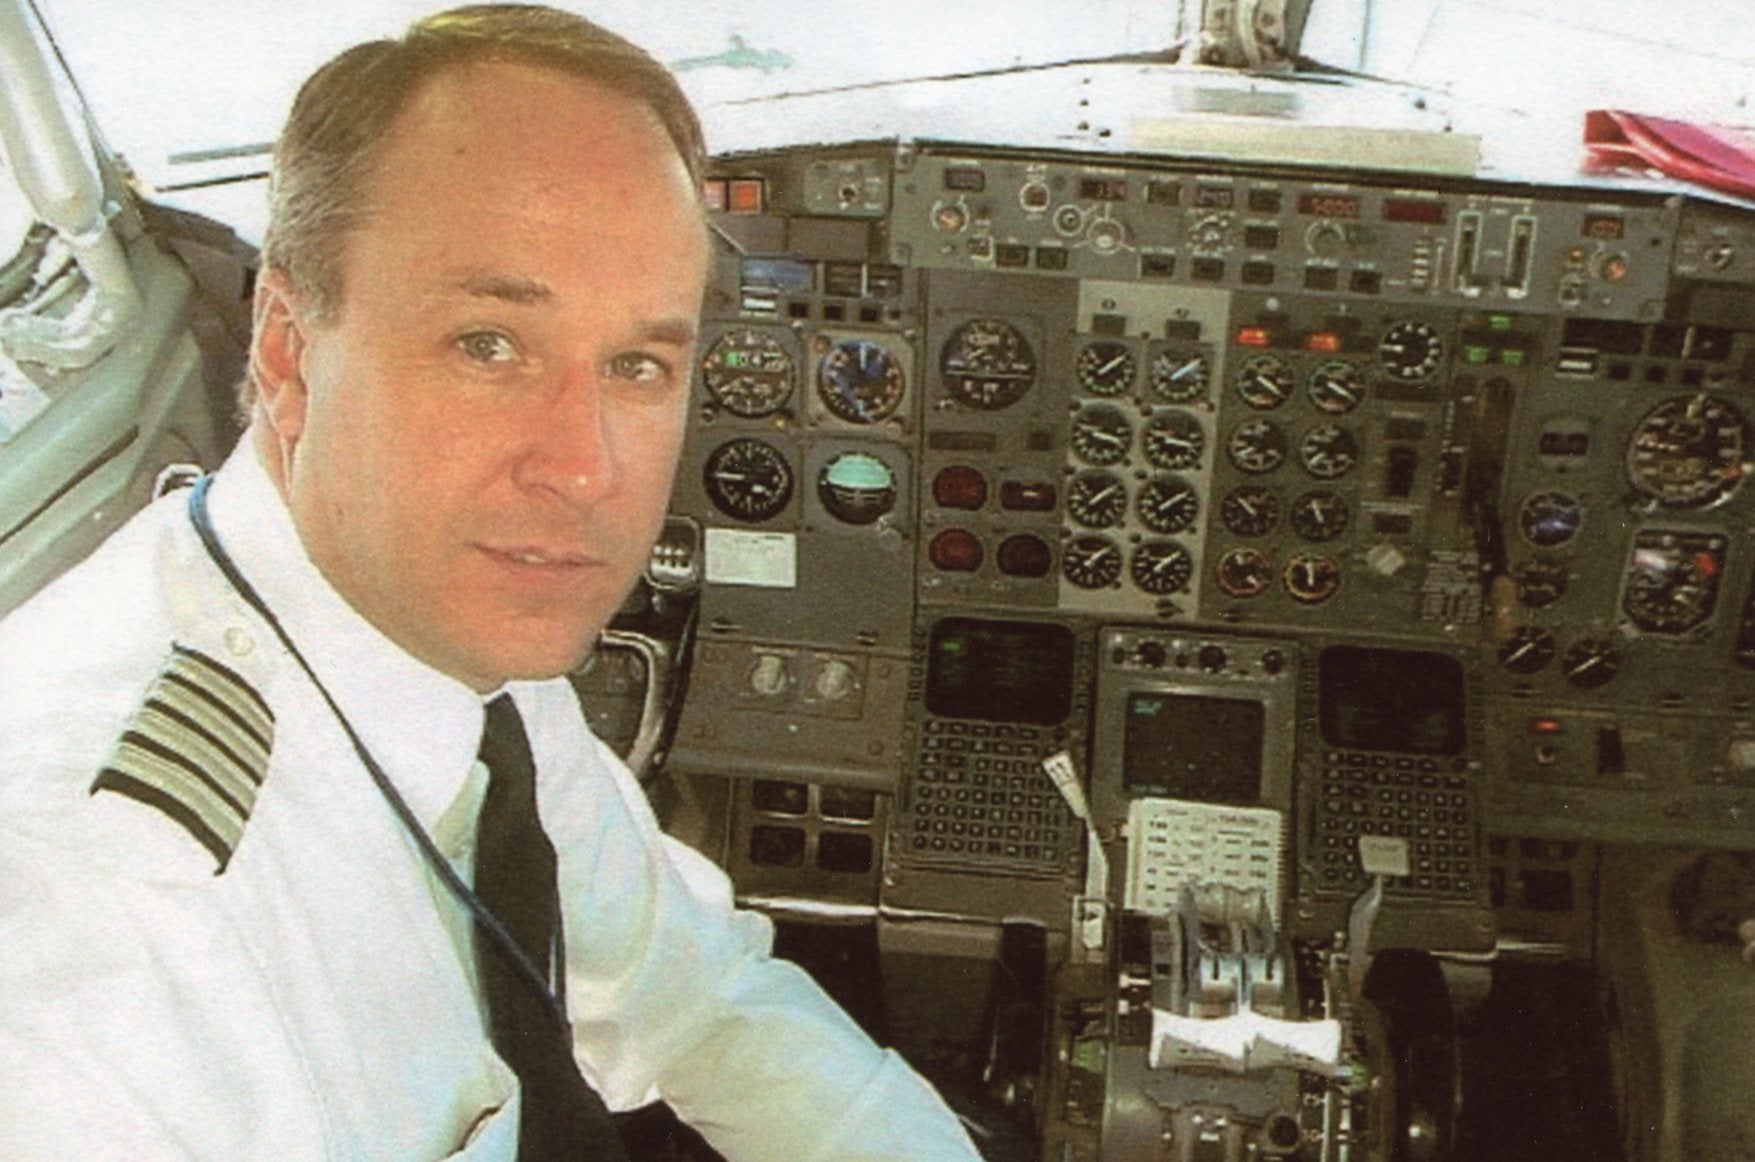 Up in the air: Singleton recounts years spent as airline pilot - The ...